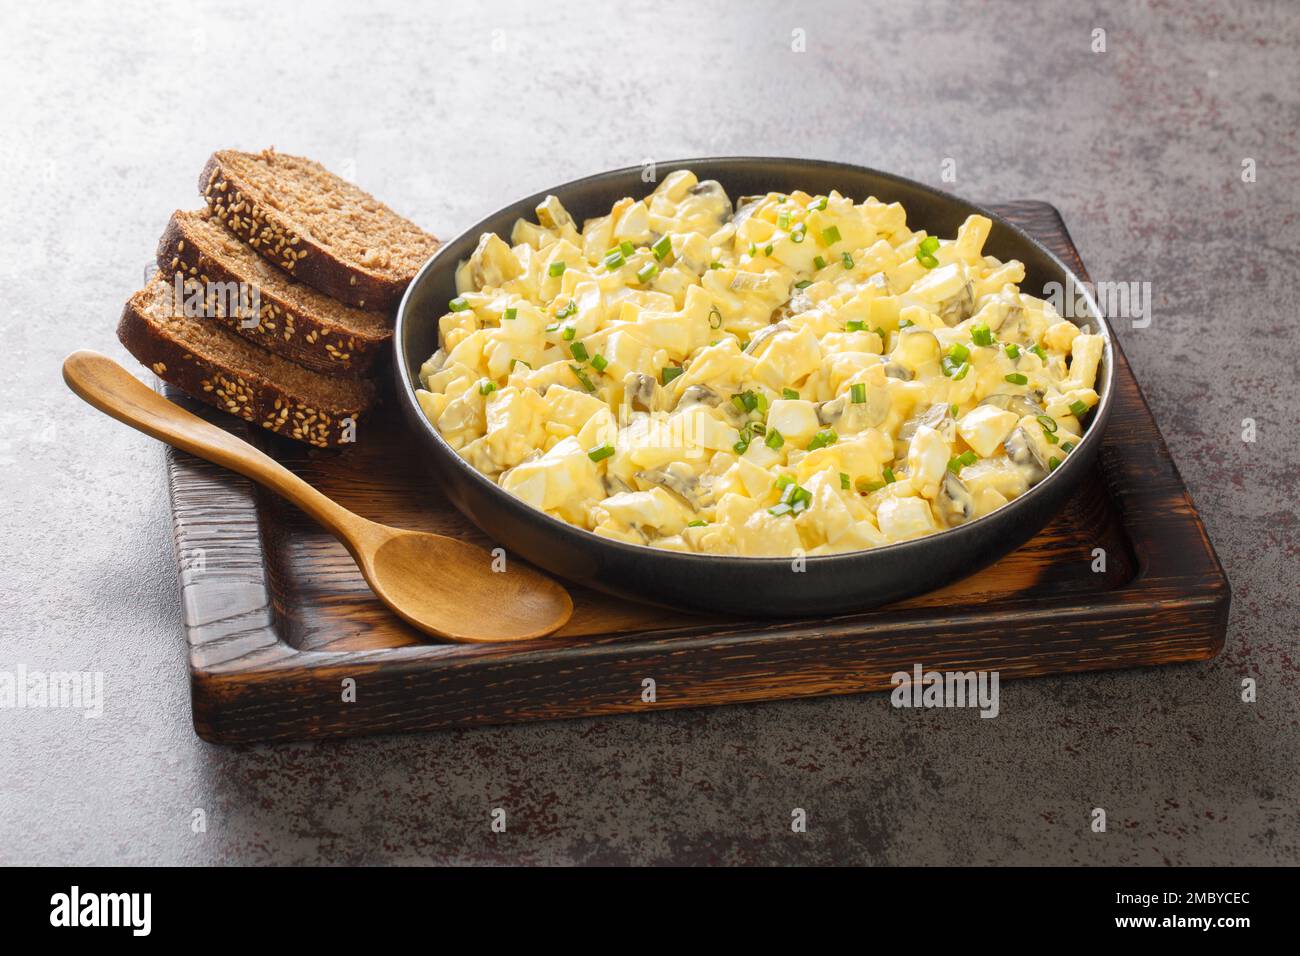 Eiersalat is a creamy German egg salad with cubes of crisp apple and crunchy sour pickles. closeup on the wooden board on the table. Horizontal Stock Photo